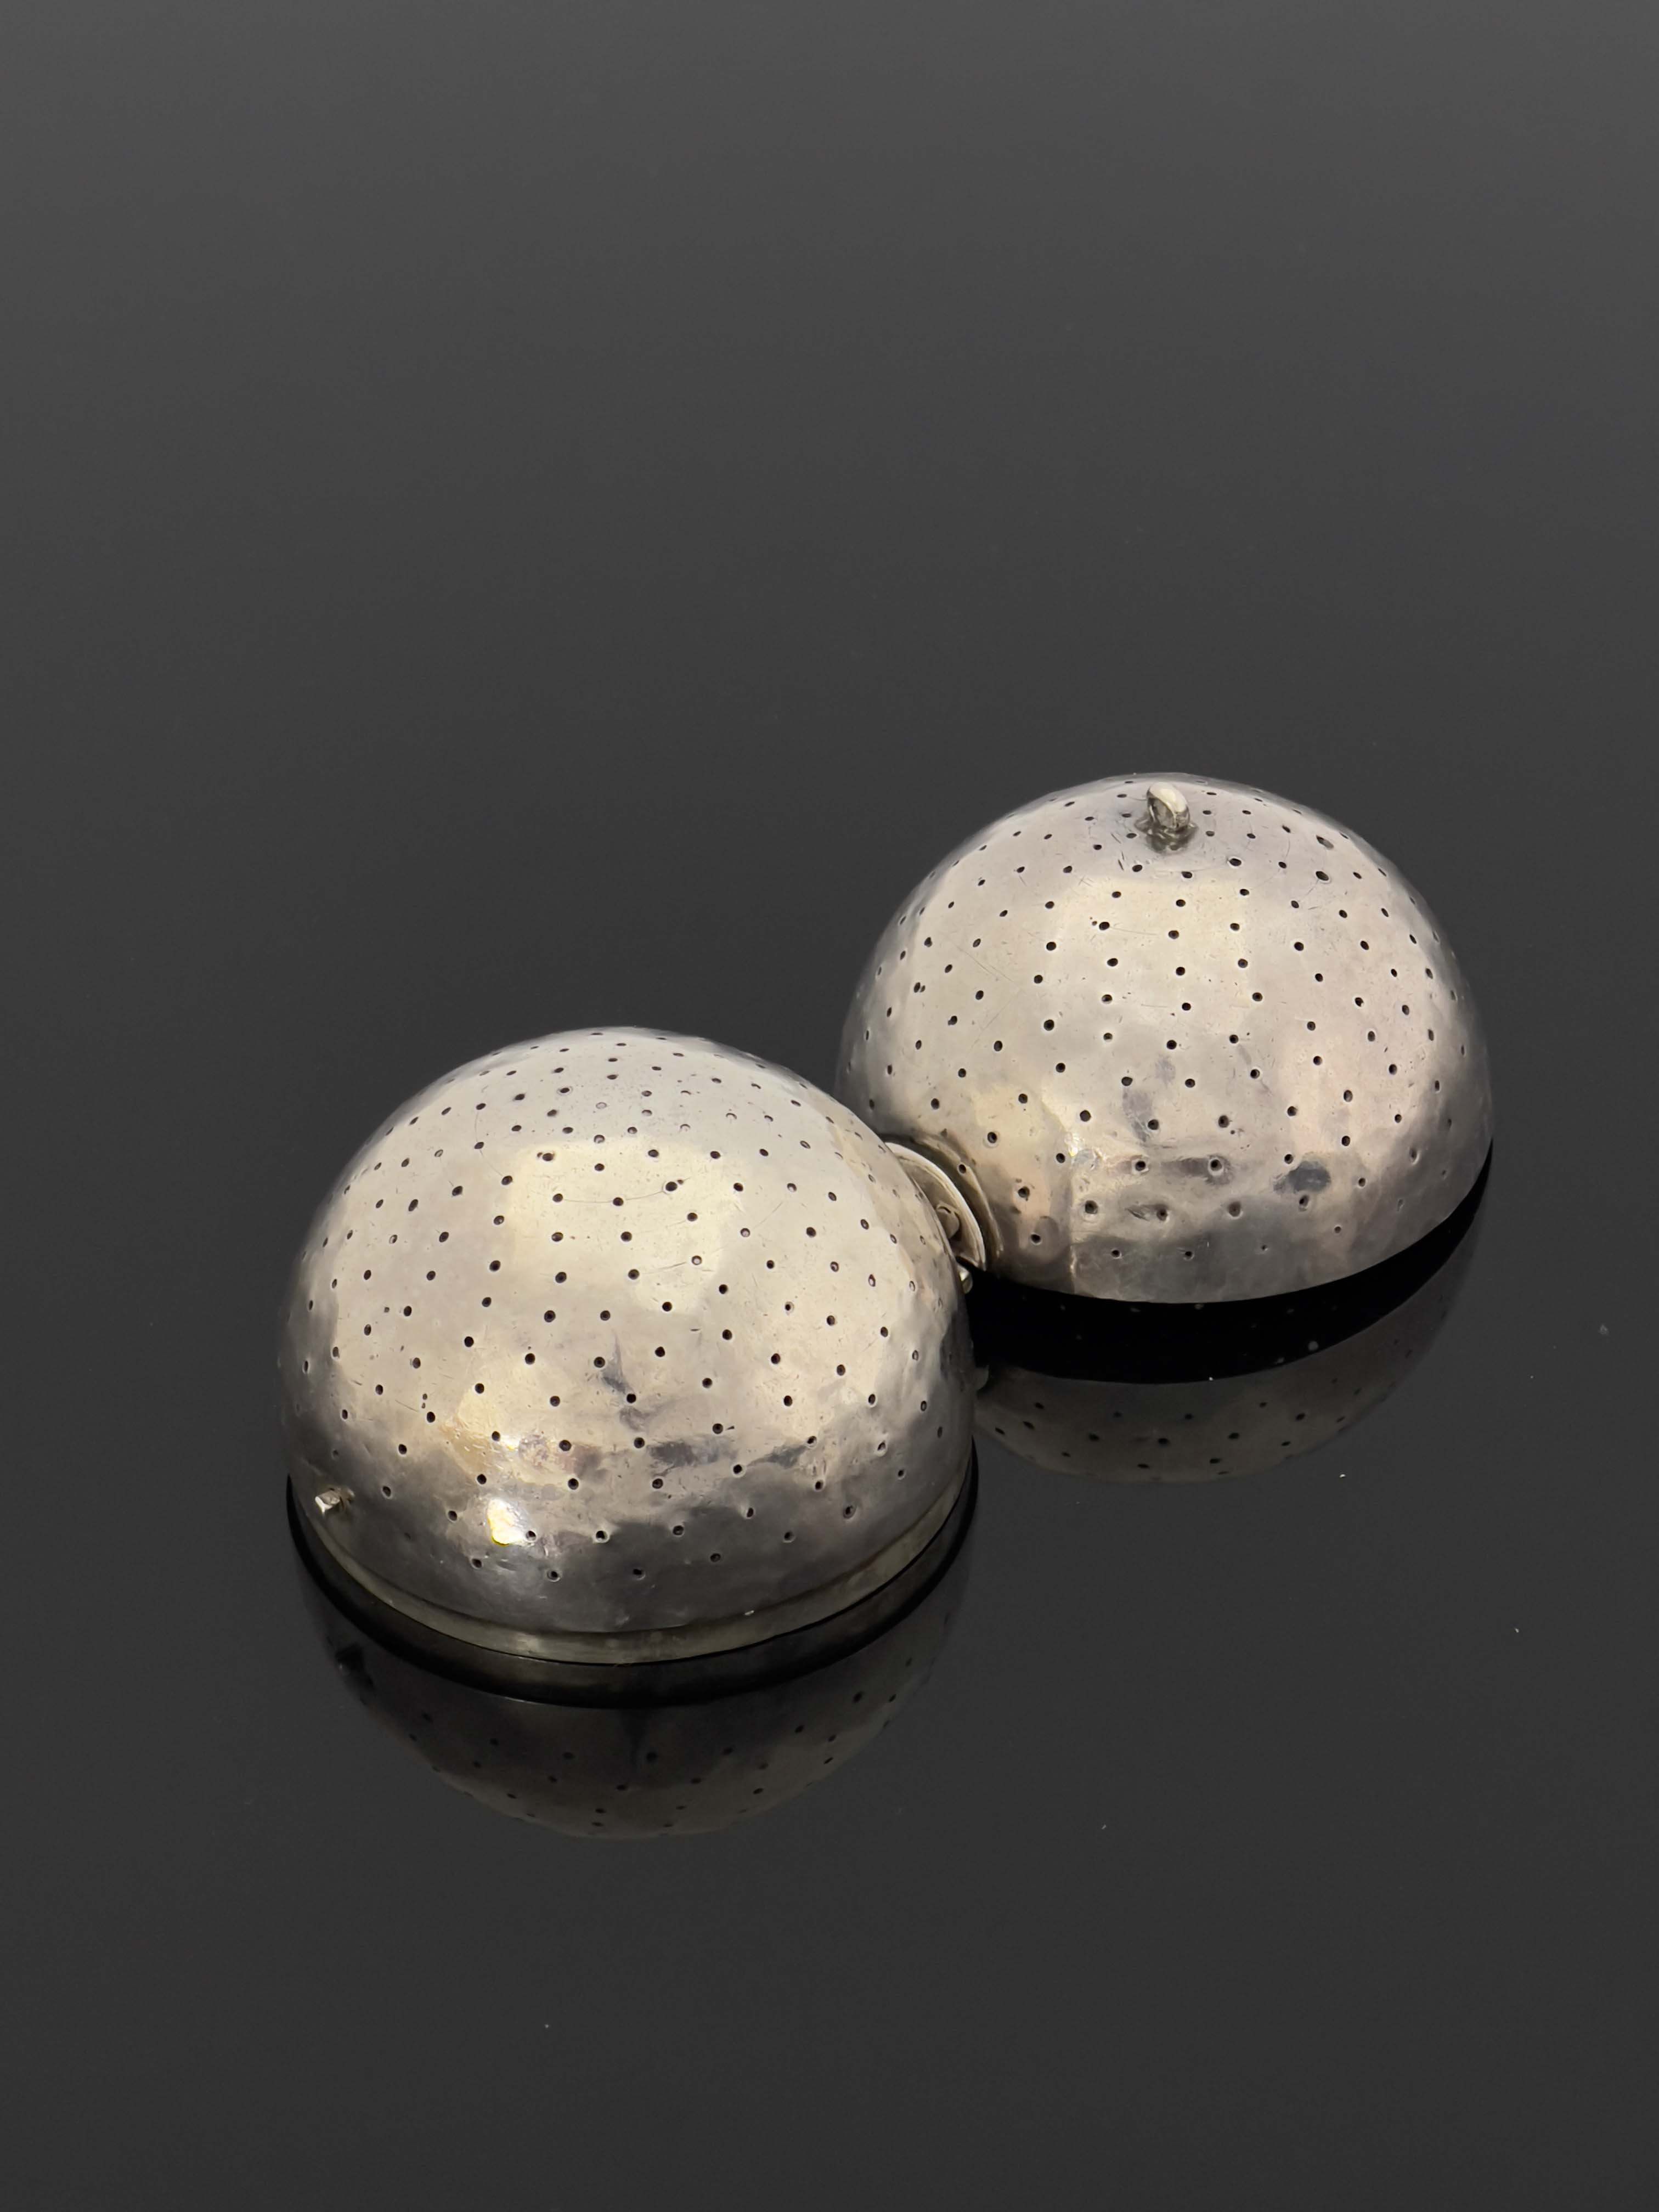 An 18th century white metal pomander or herb infus - Image 3 of 5